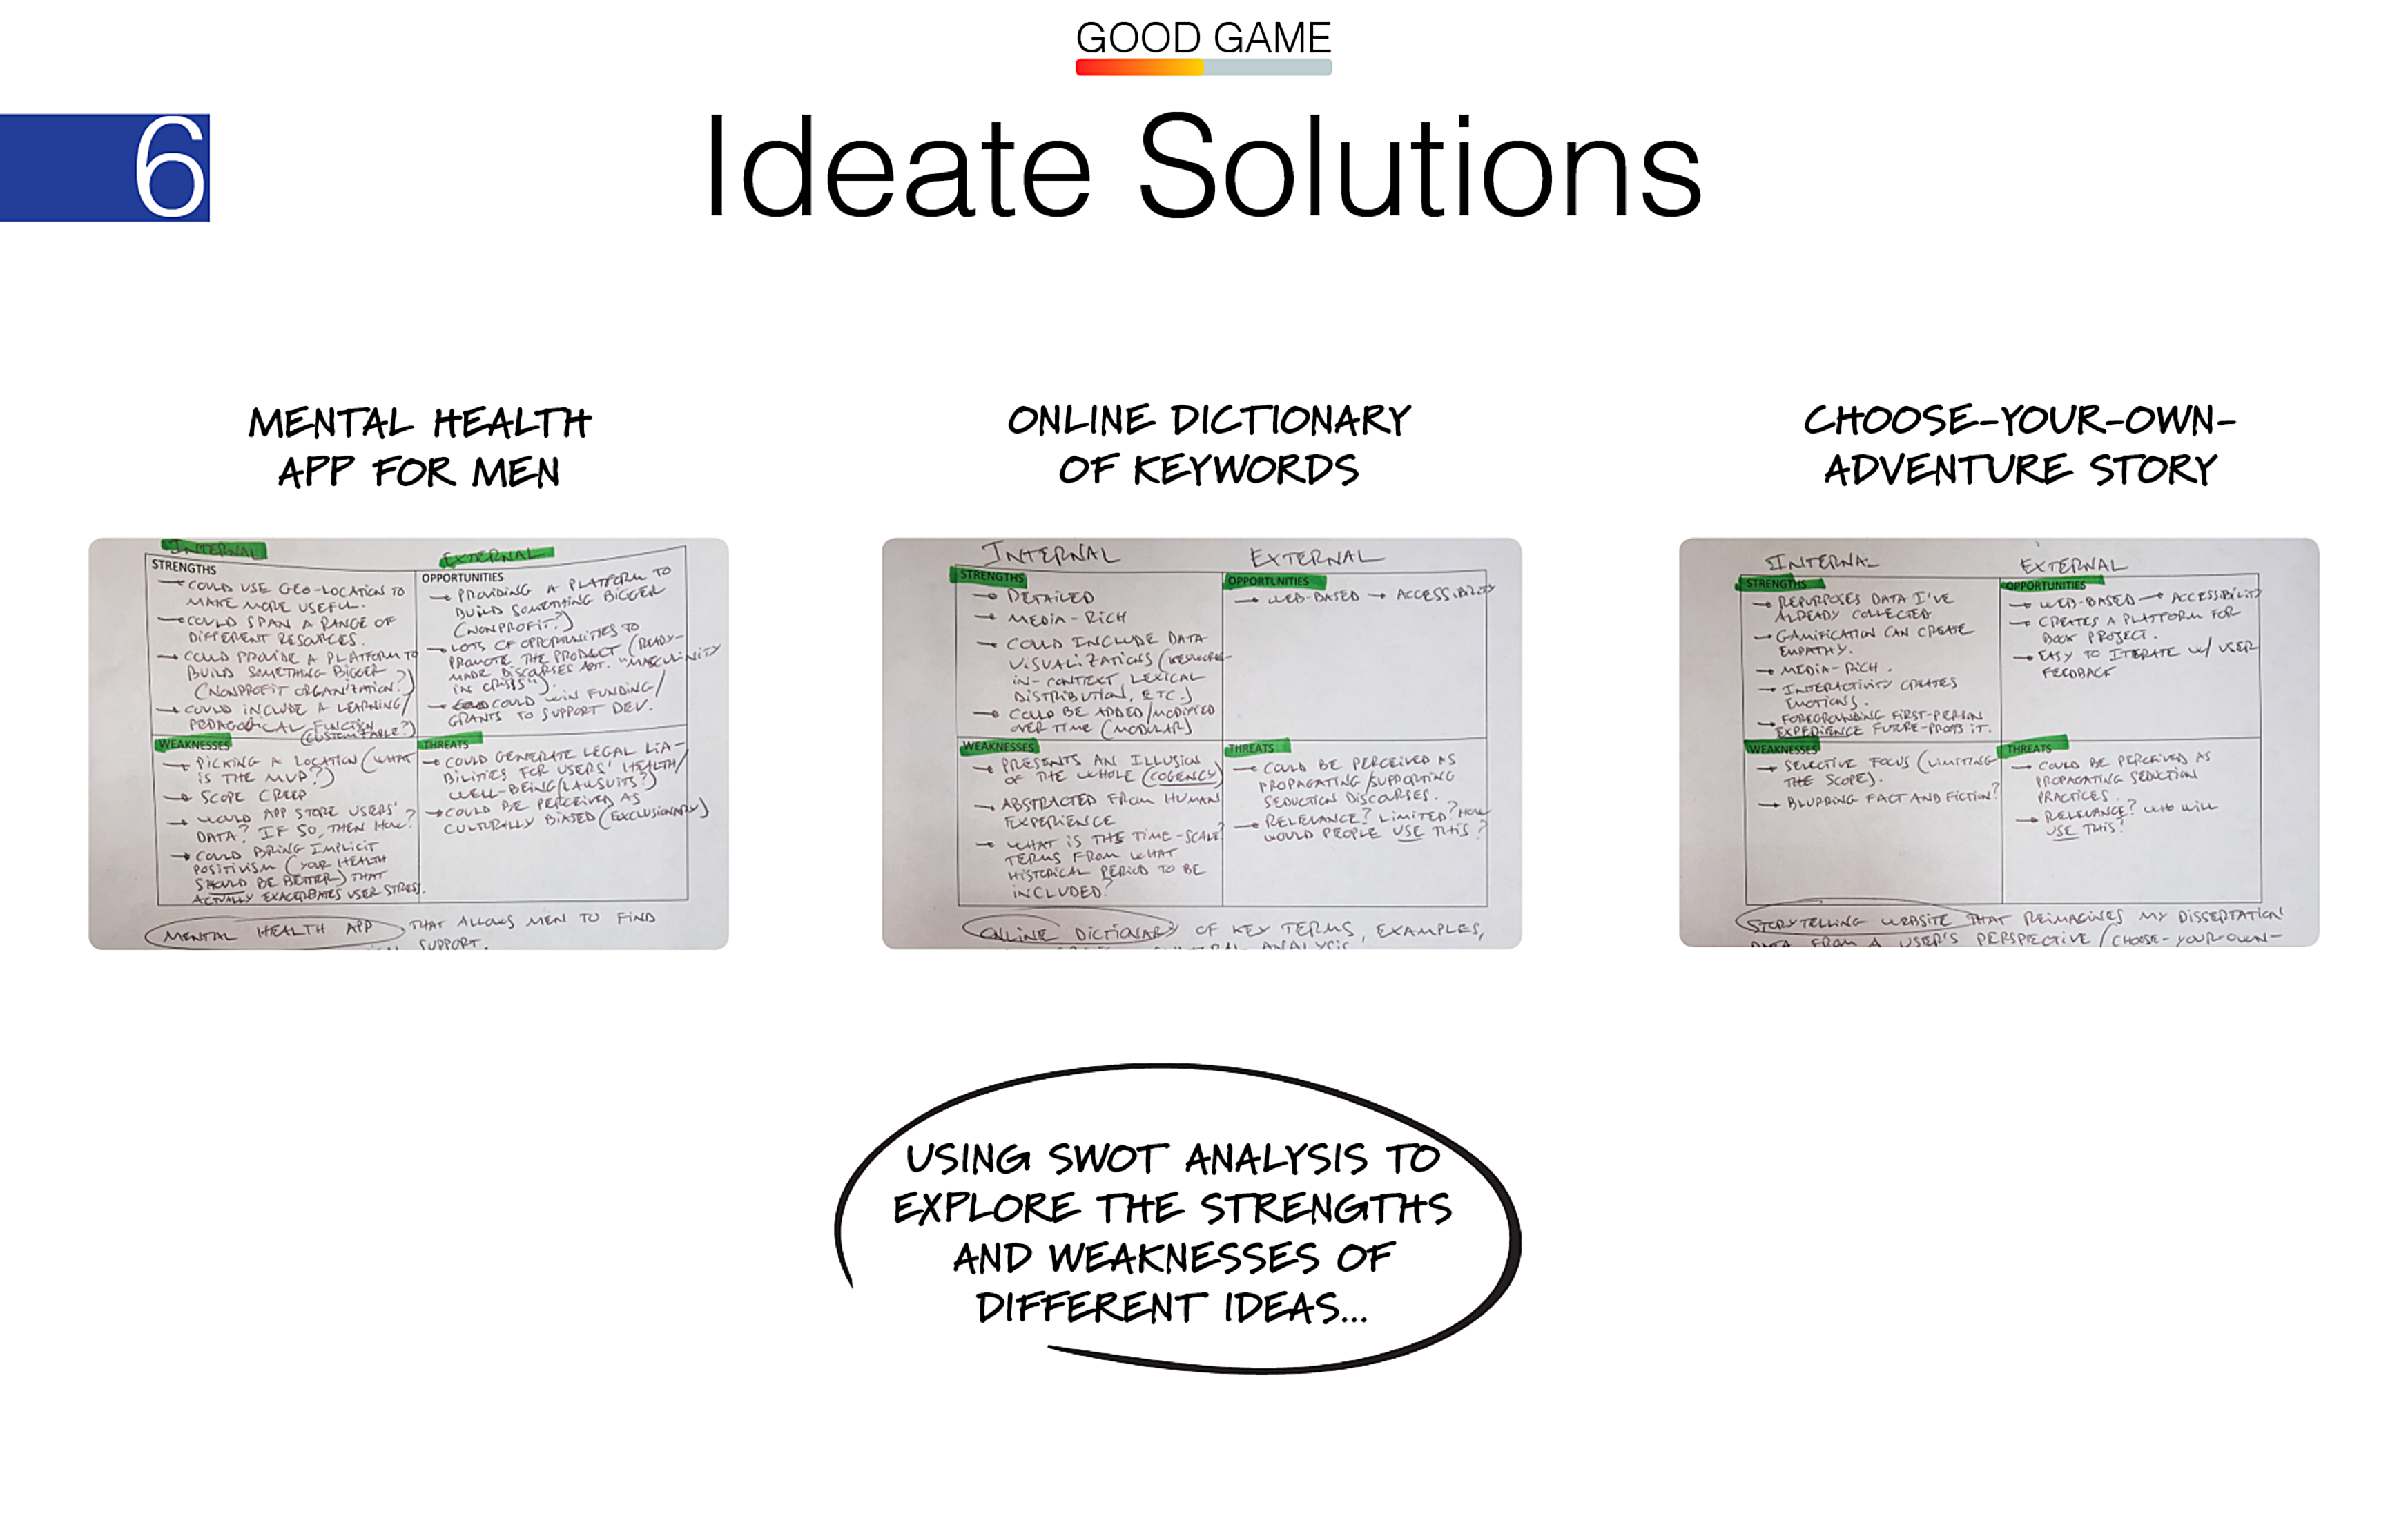 ideating solutions to our challenge, including ideas for an online dictionary, an app for mental health wellness, and a choose your own adventure storytelling game